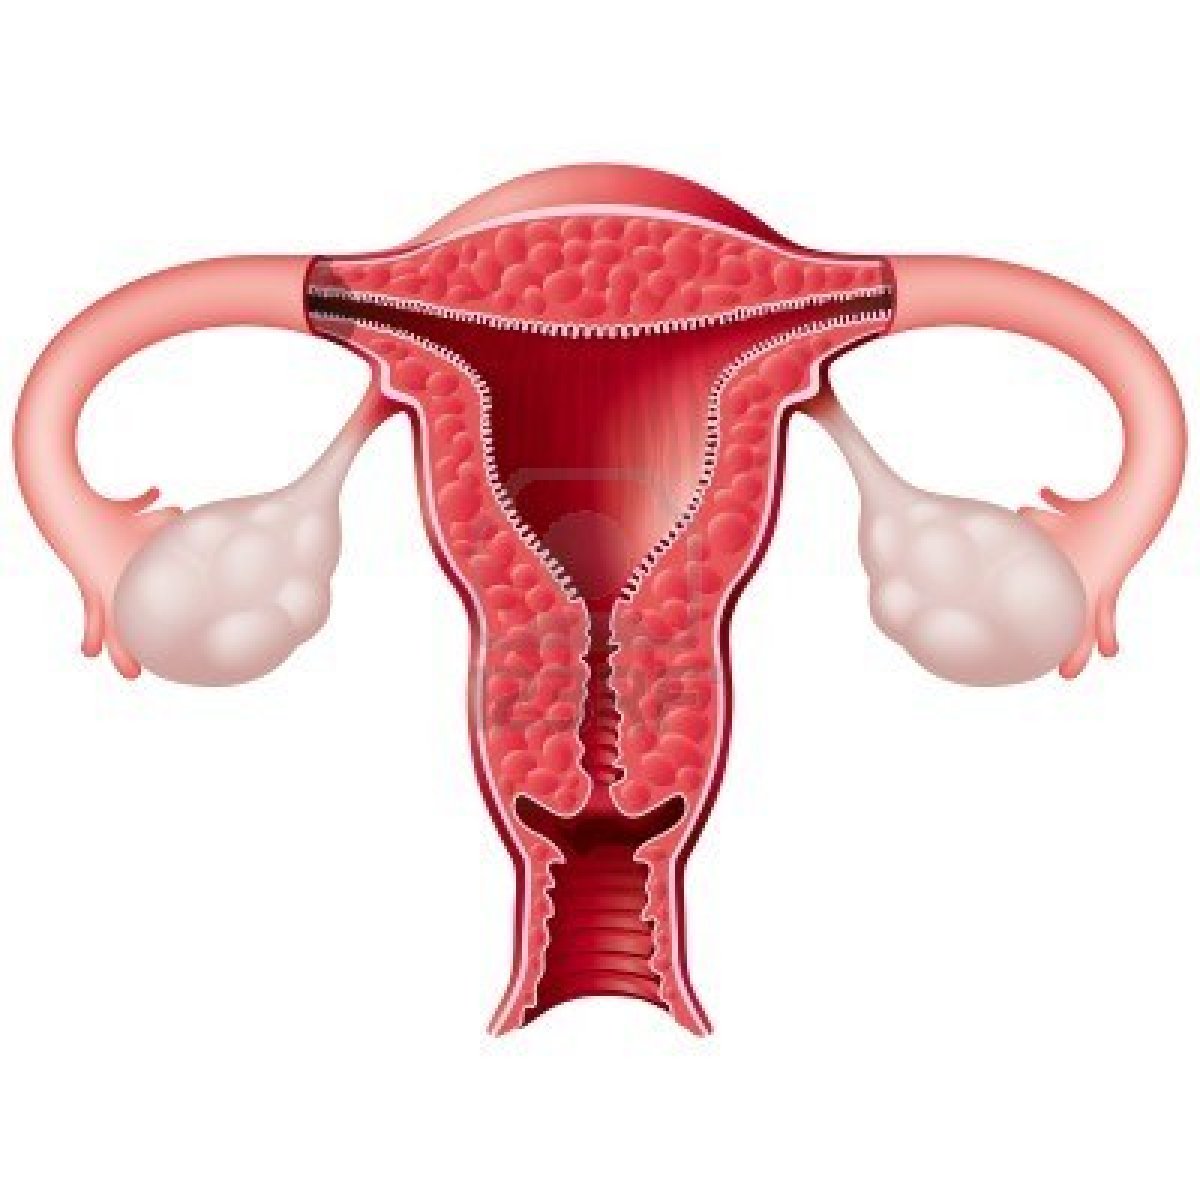 Cervix: The cervix is the lower, narrow portion of the ut ...